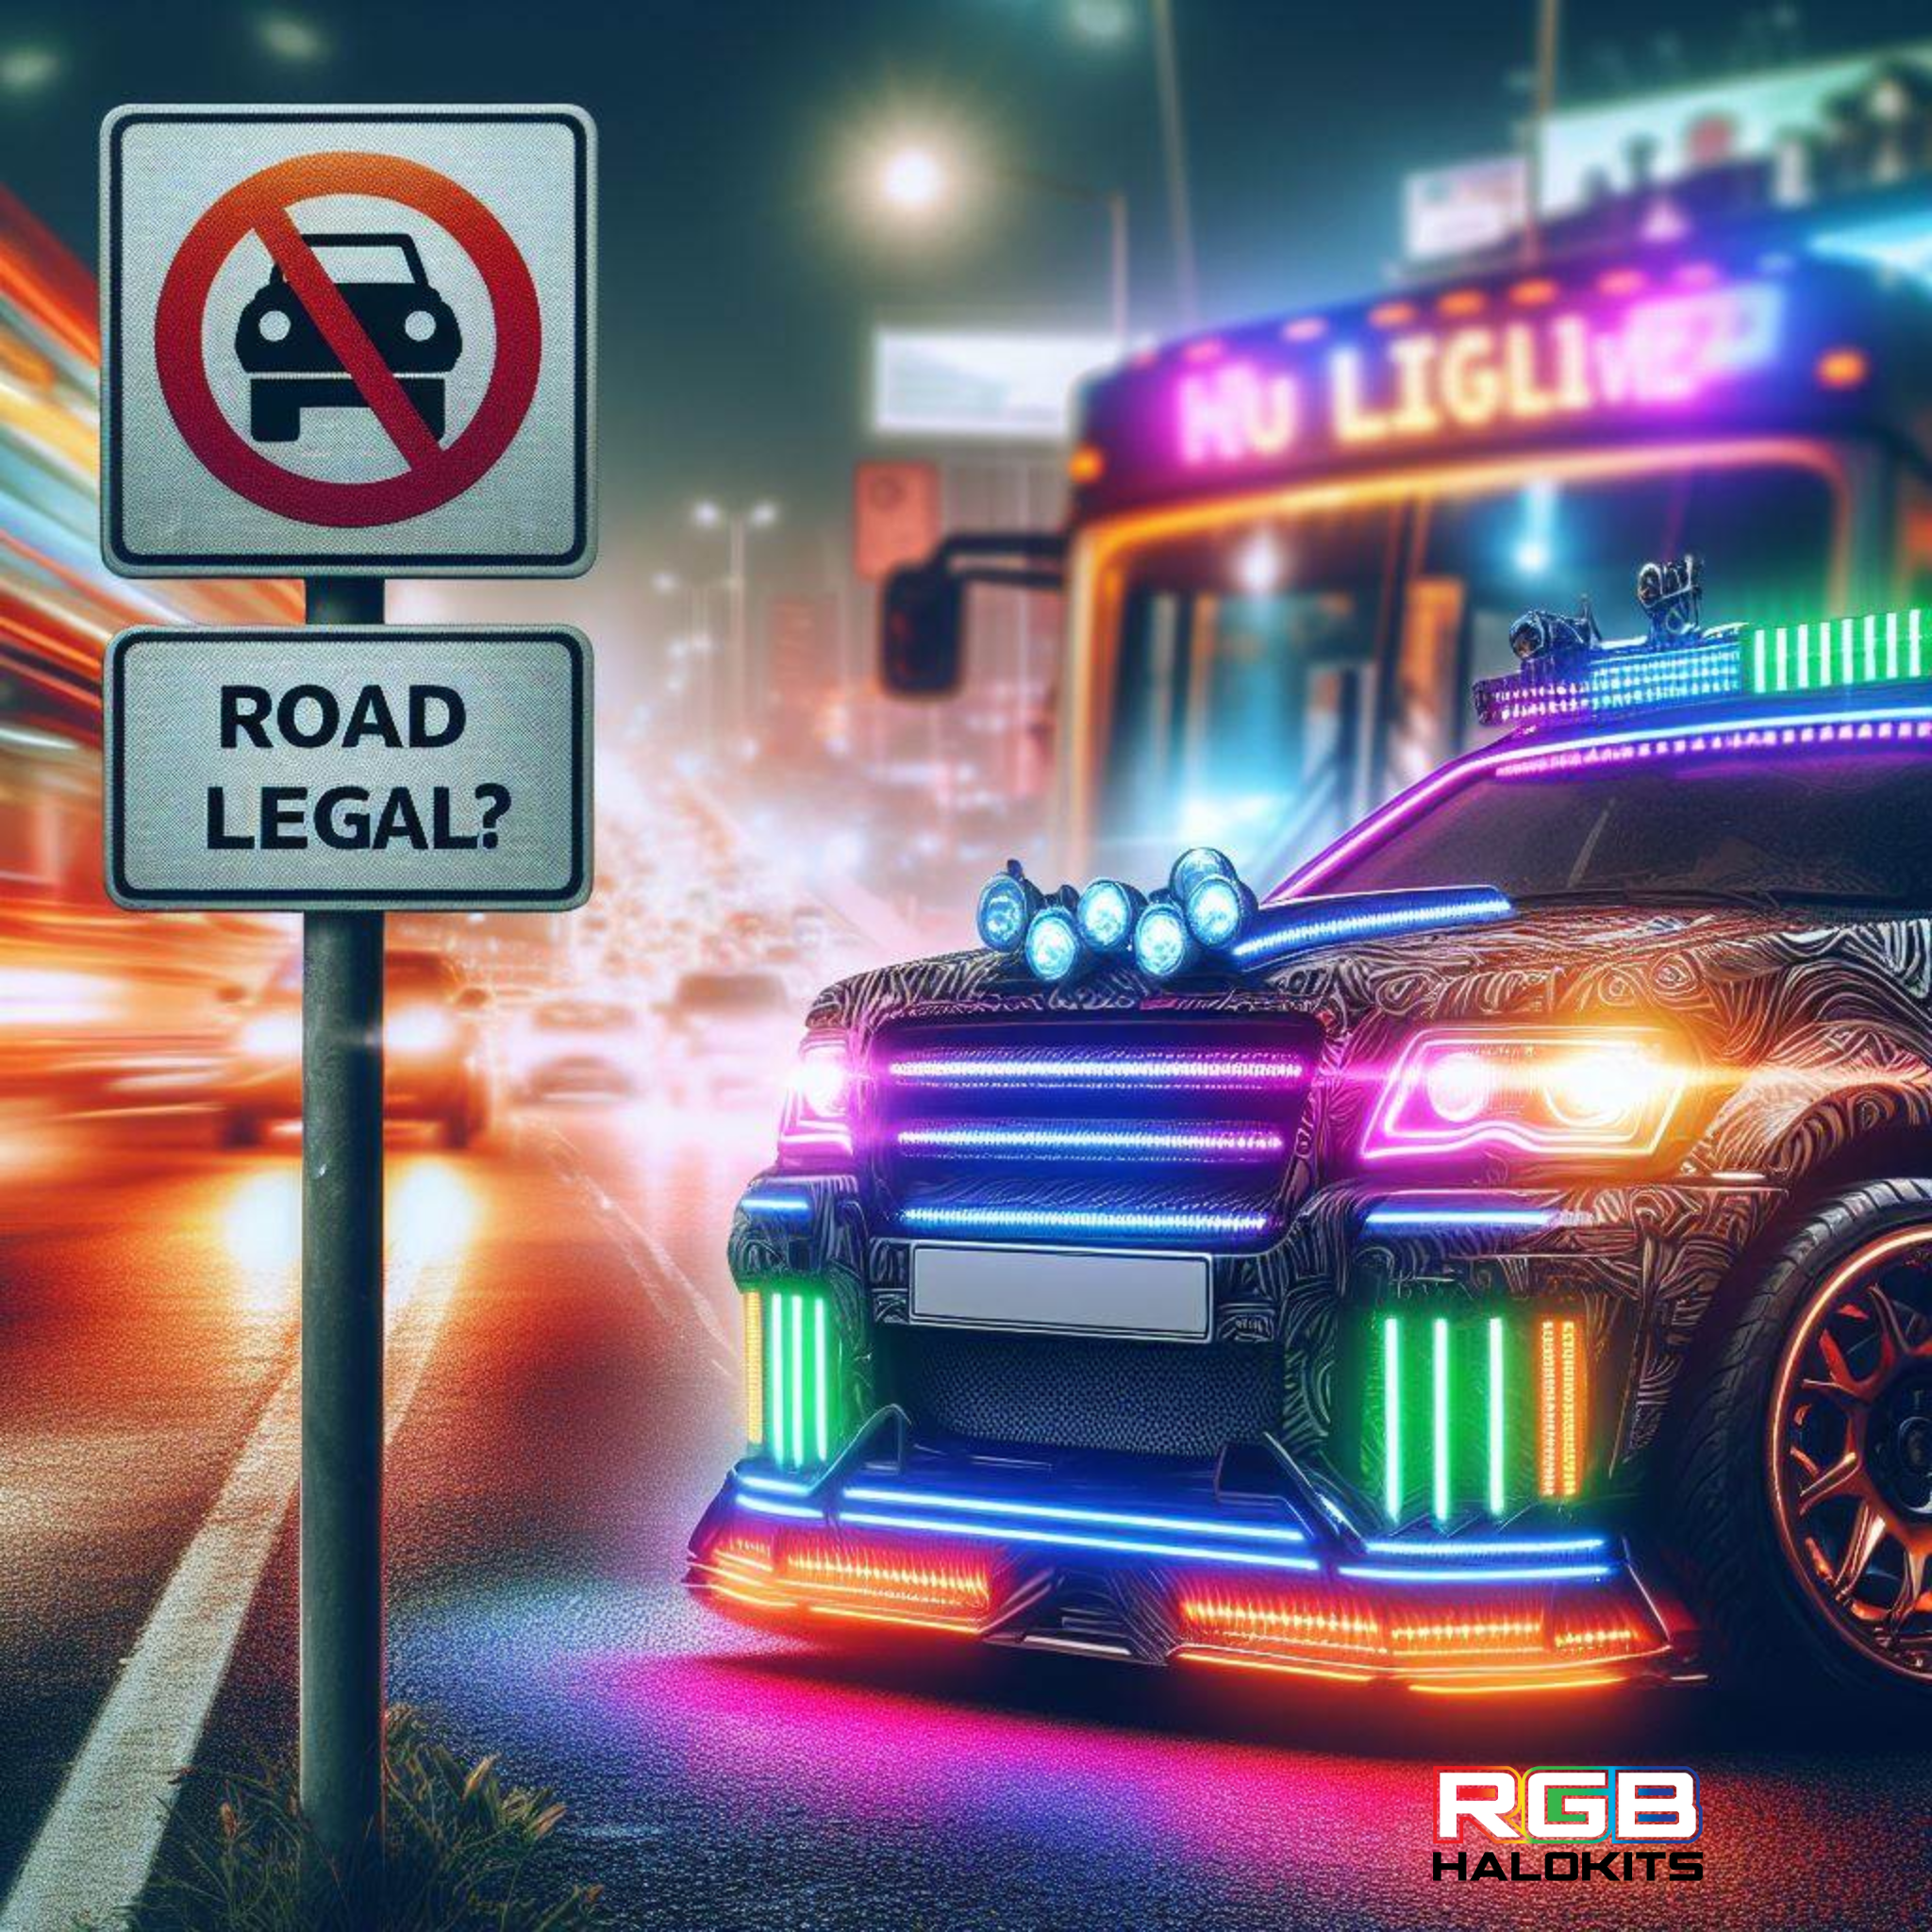 Are your Multicolor Light Kits Road Legal?